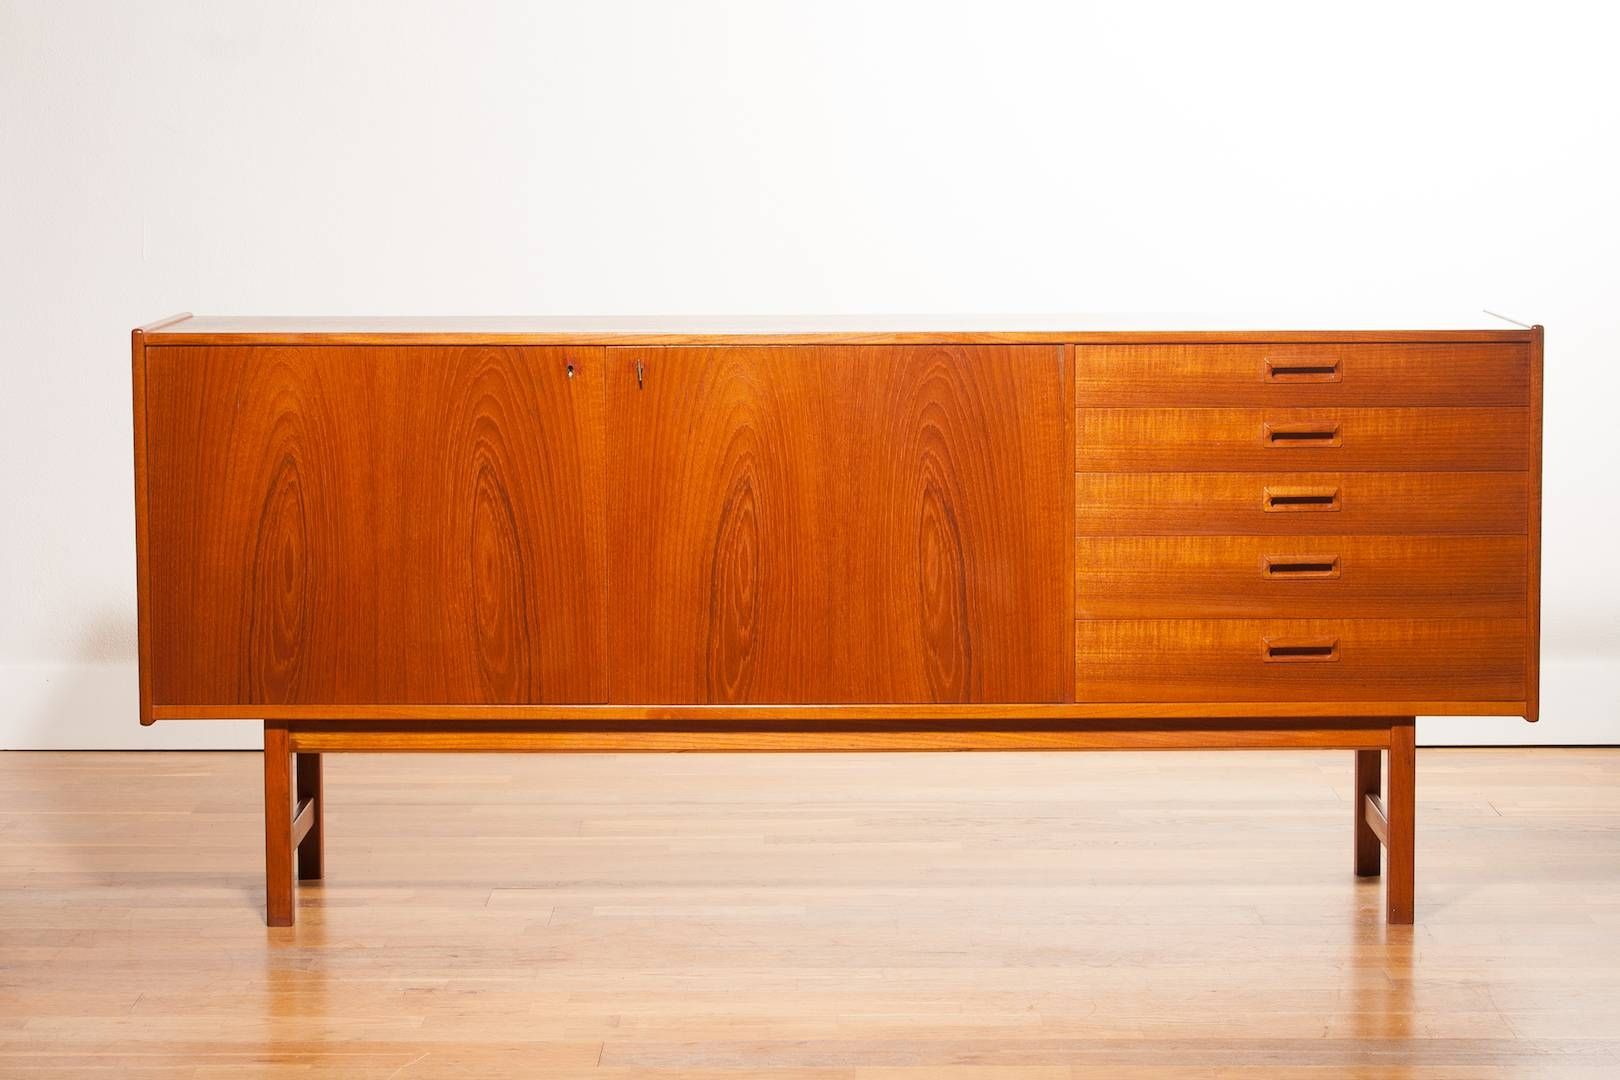 Danish Teak Sideboard From Ulferts, 1960s For Sale At Pamono For Most Popular Teak Sideboards (View 15 of 15)